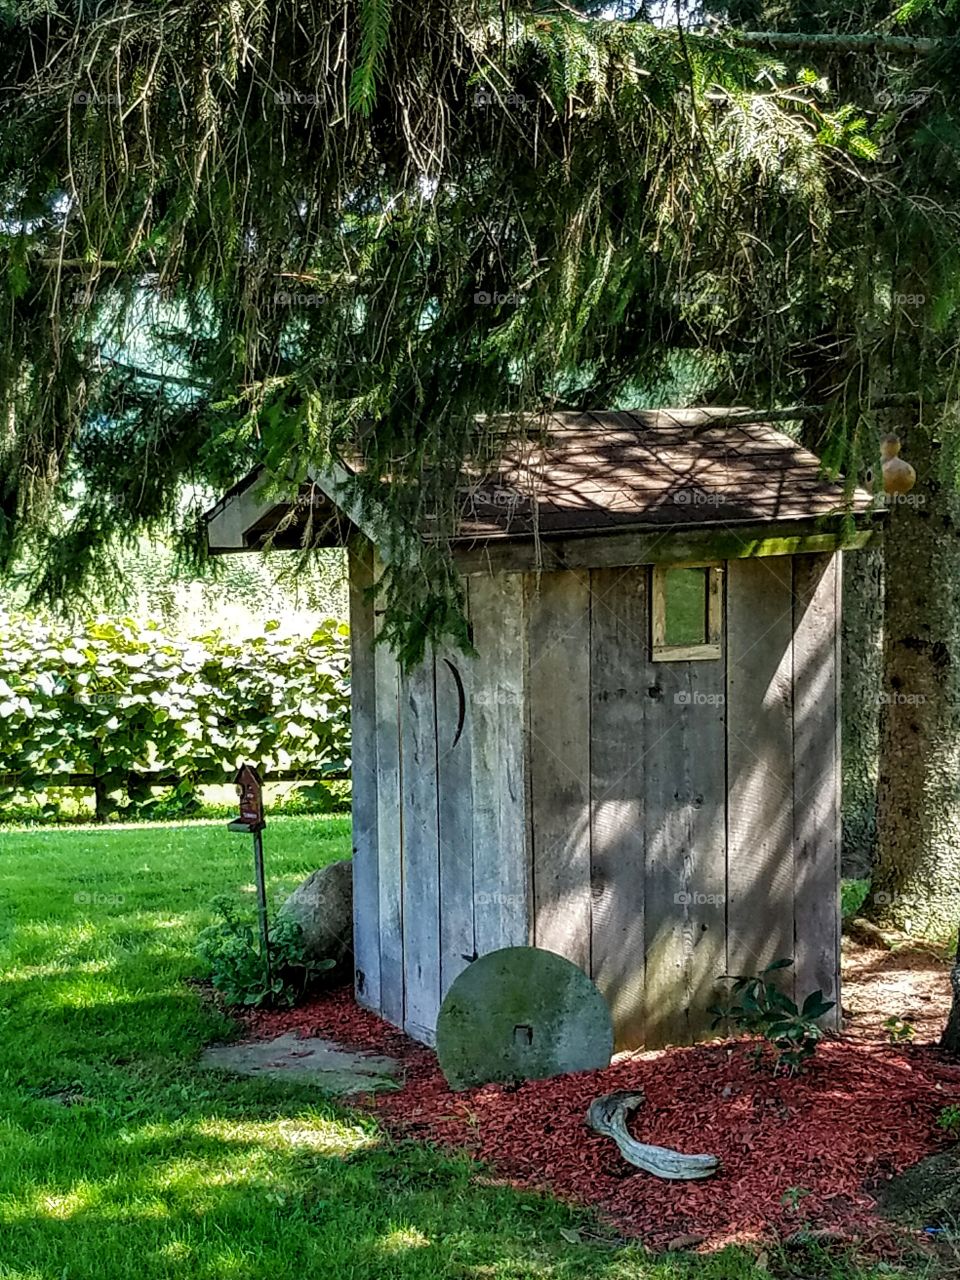 'OUTHOUSE'
UPSTATE NEW YORK